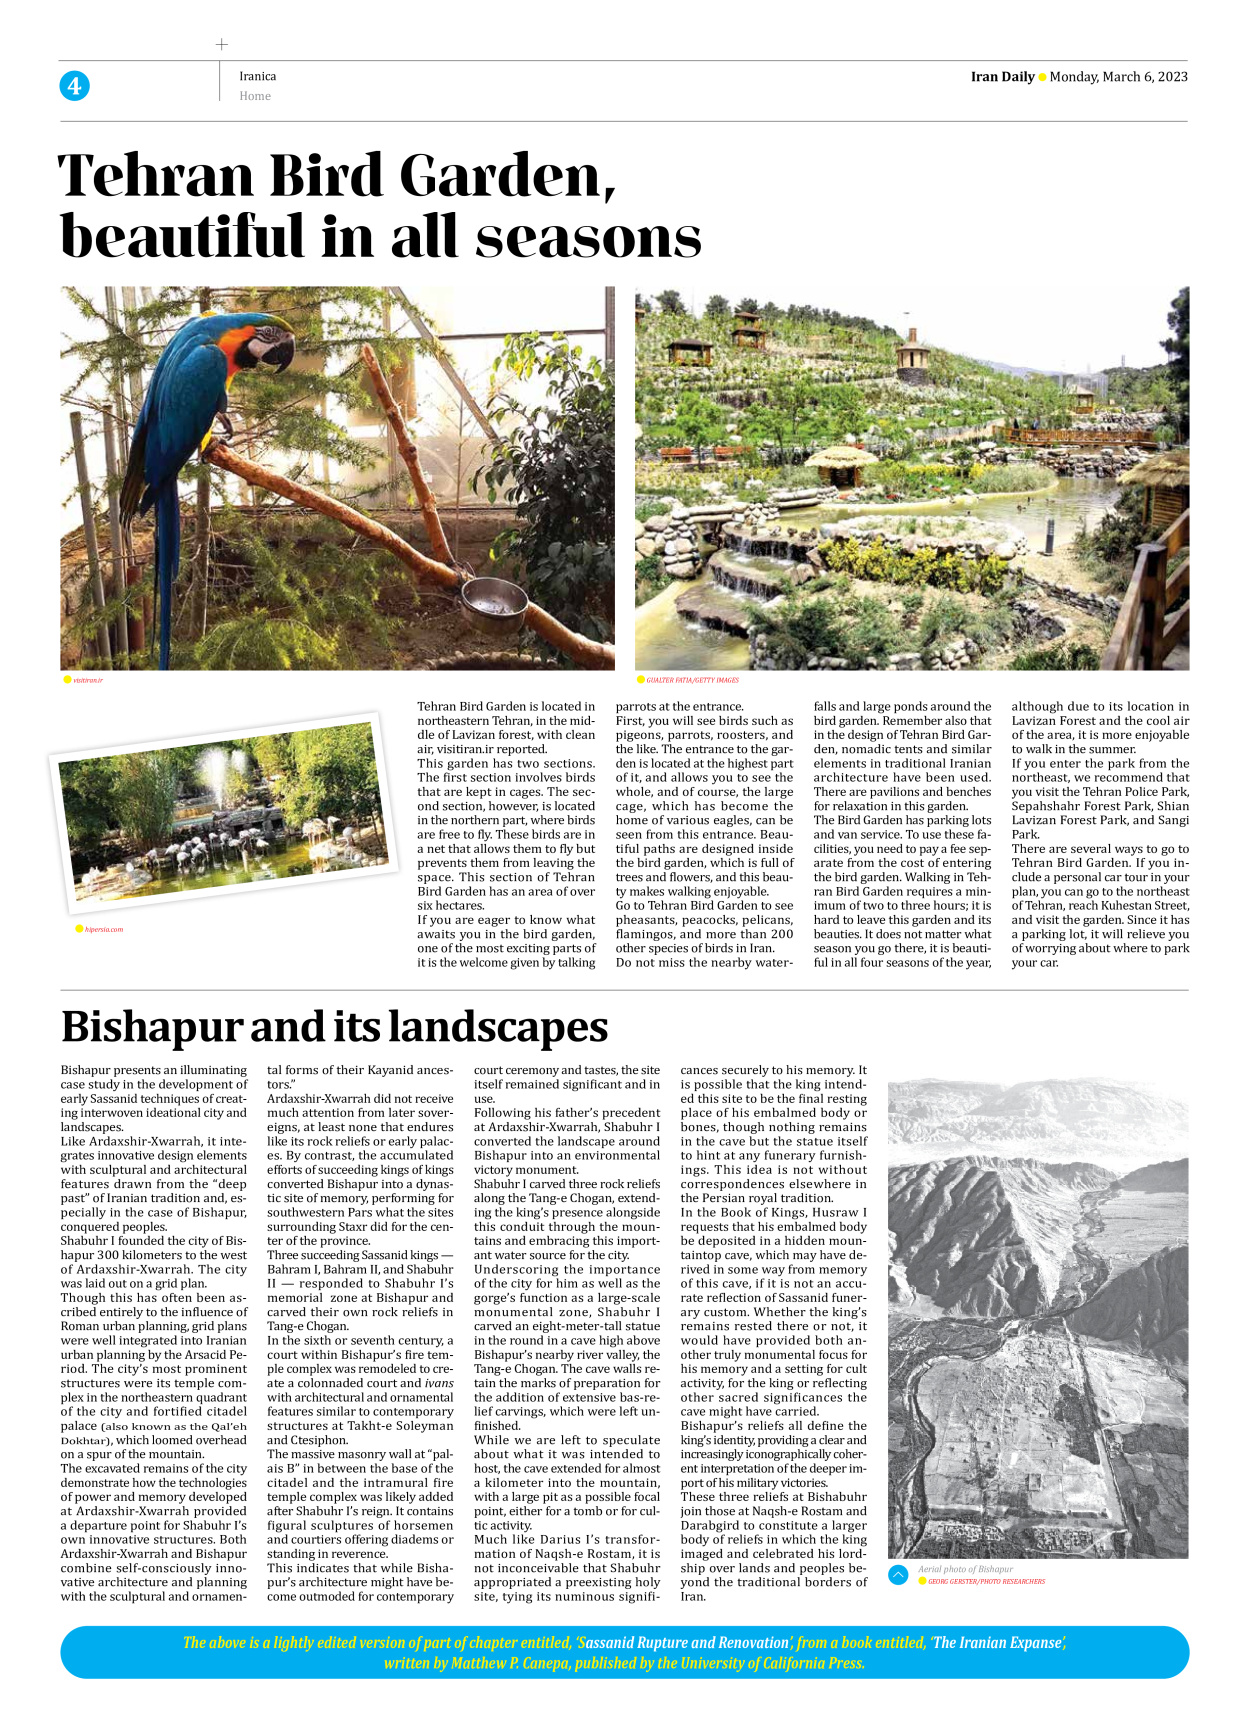 Iran Daily - Number Seven Thousand Two Hundred and Fifty Two - 06 March 2023 - Page 4